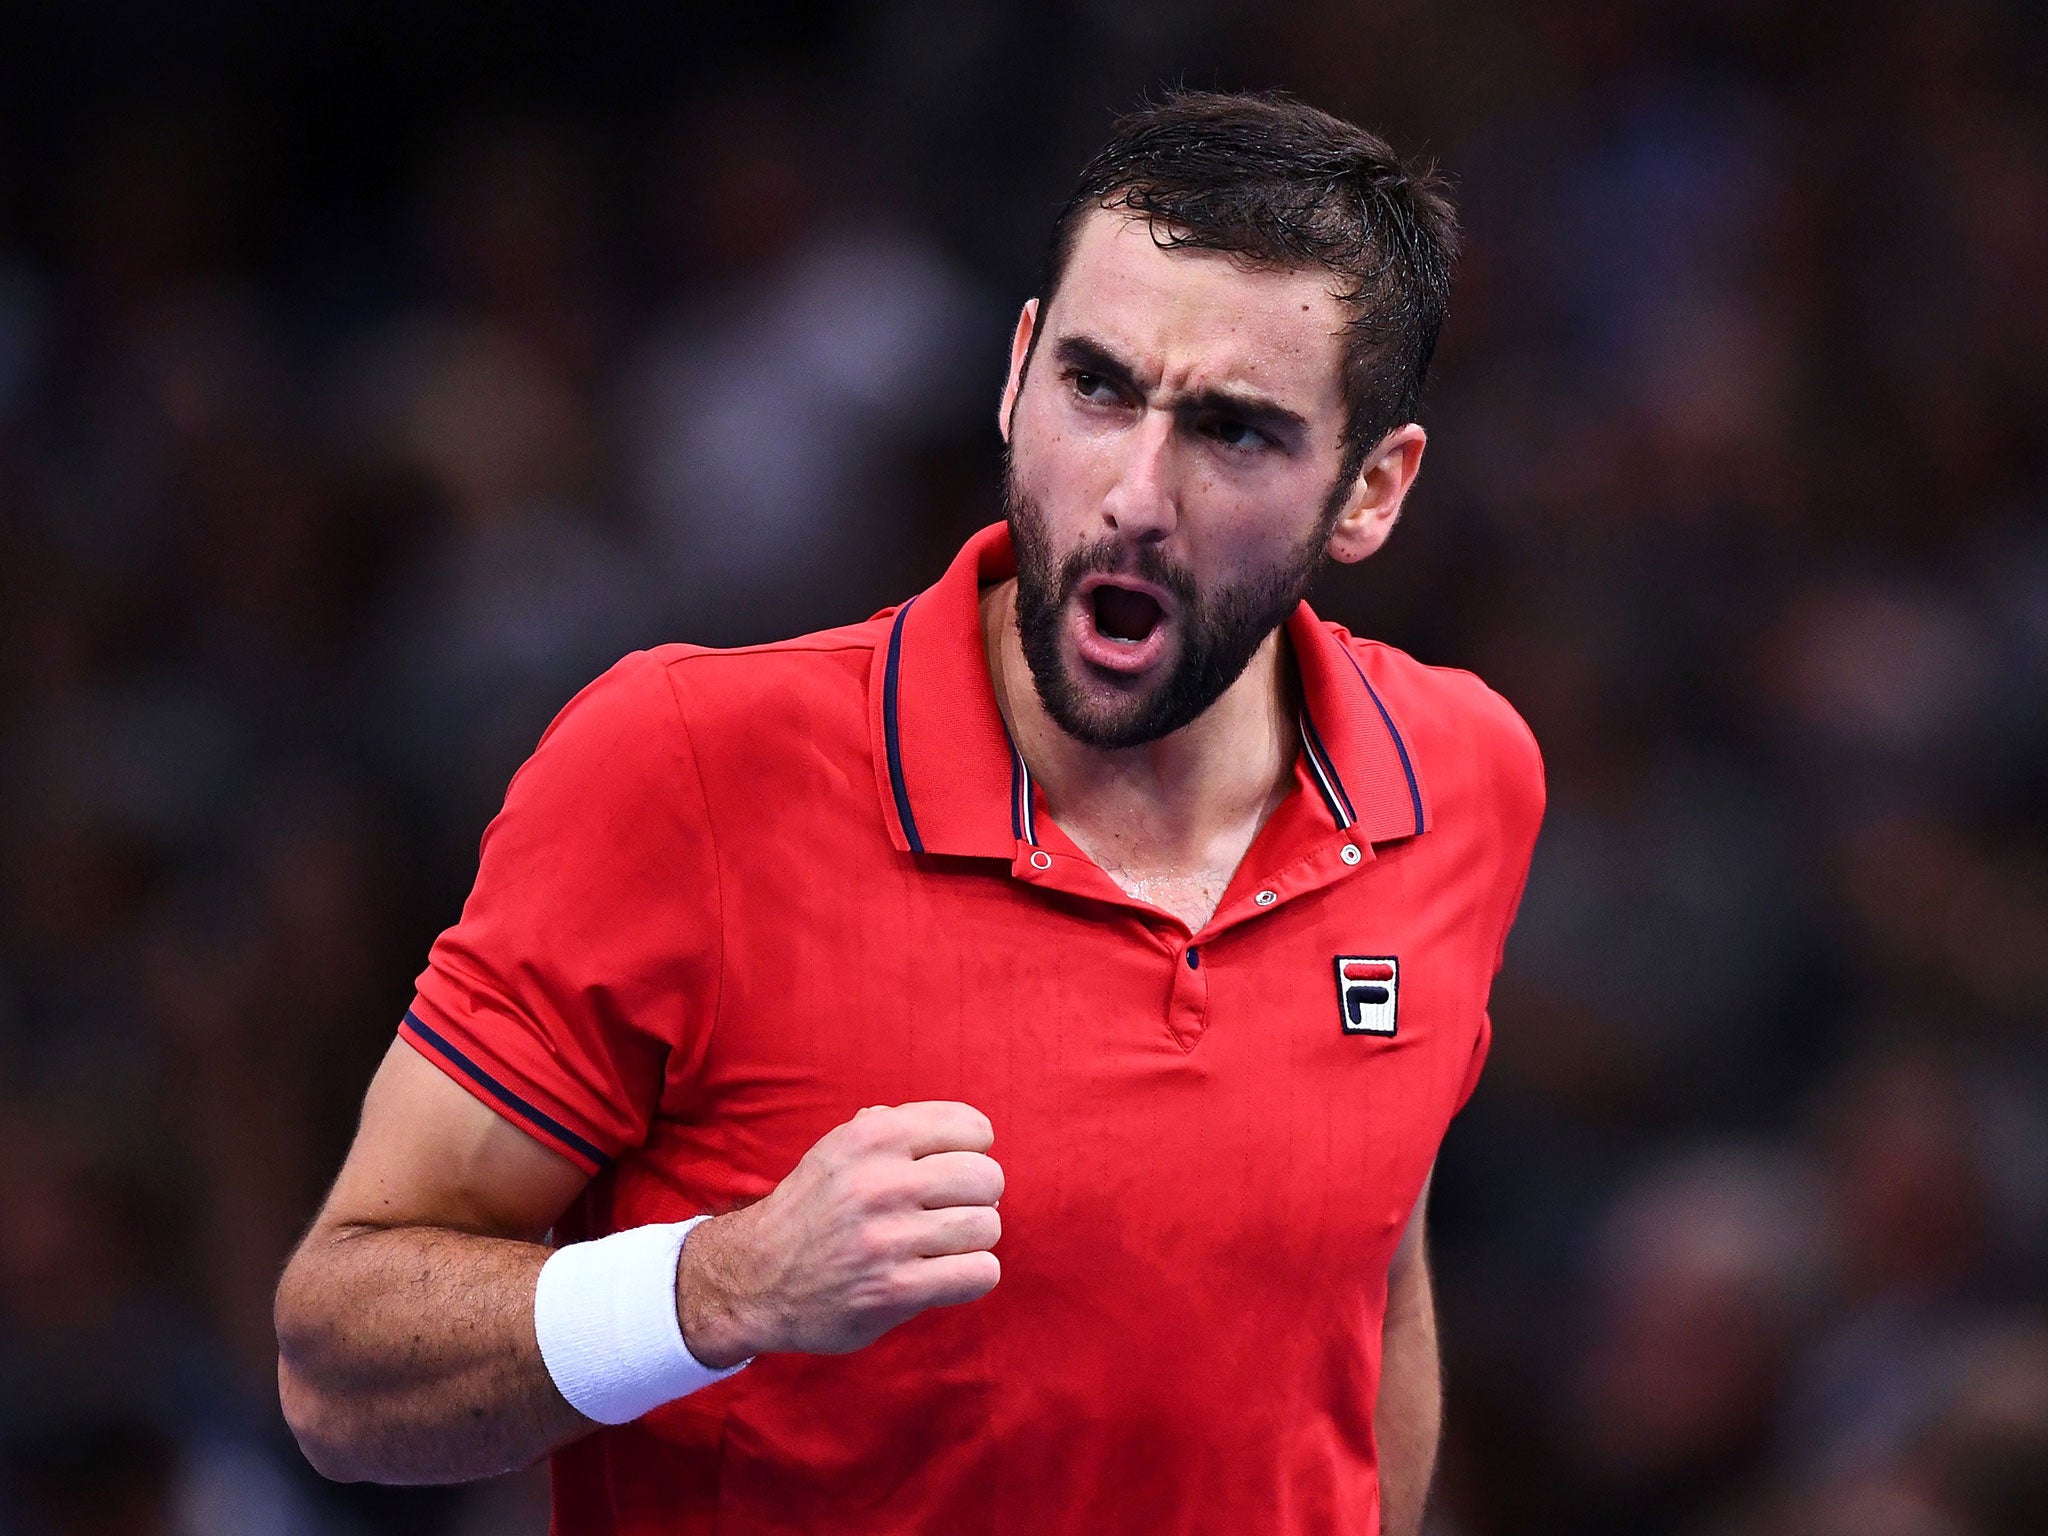 The Croatian advances to the semi-finals after pulling off a shock win against Djokovic